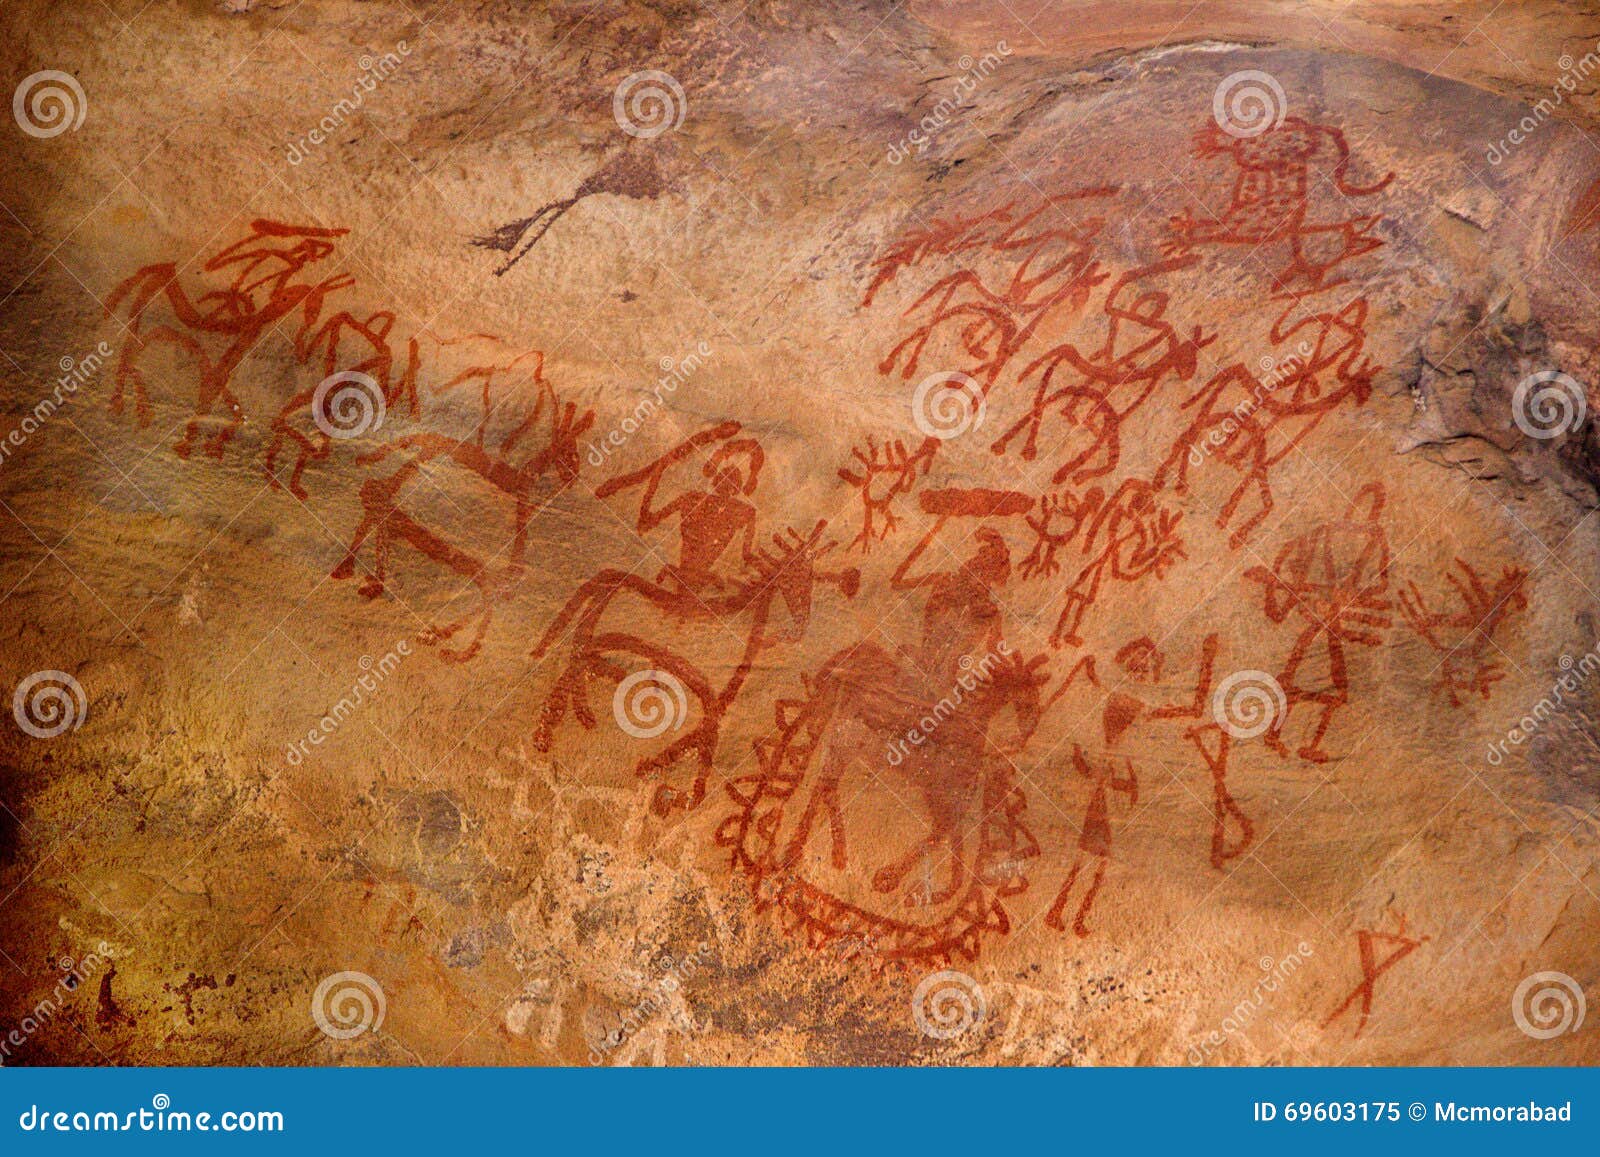 primitive art on cave wall